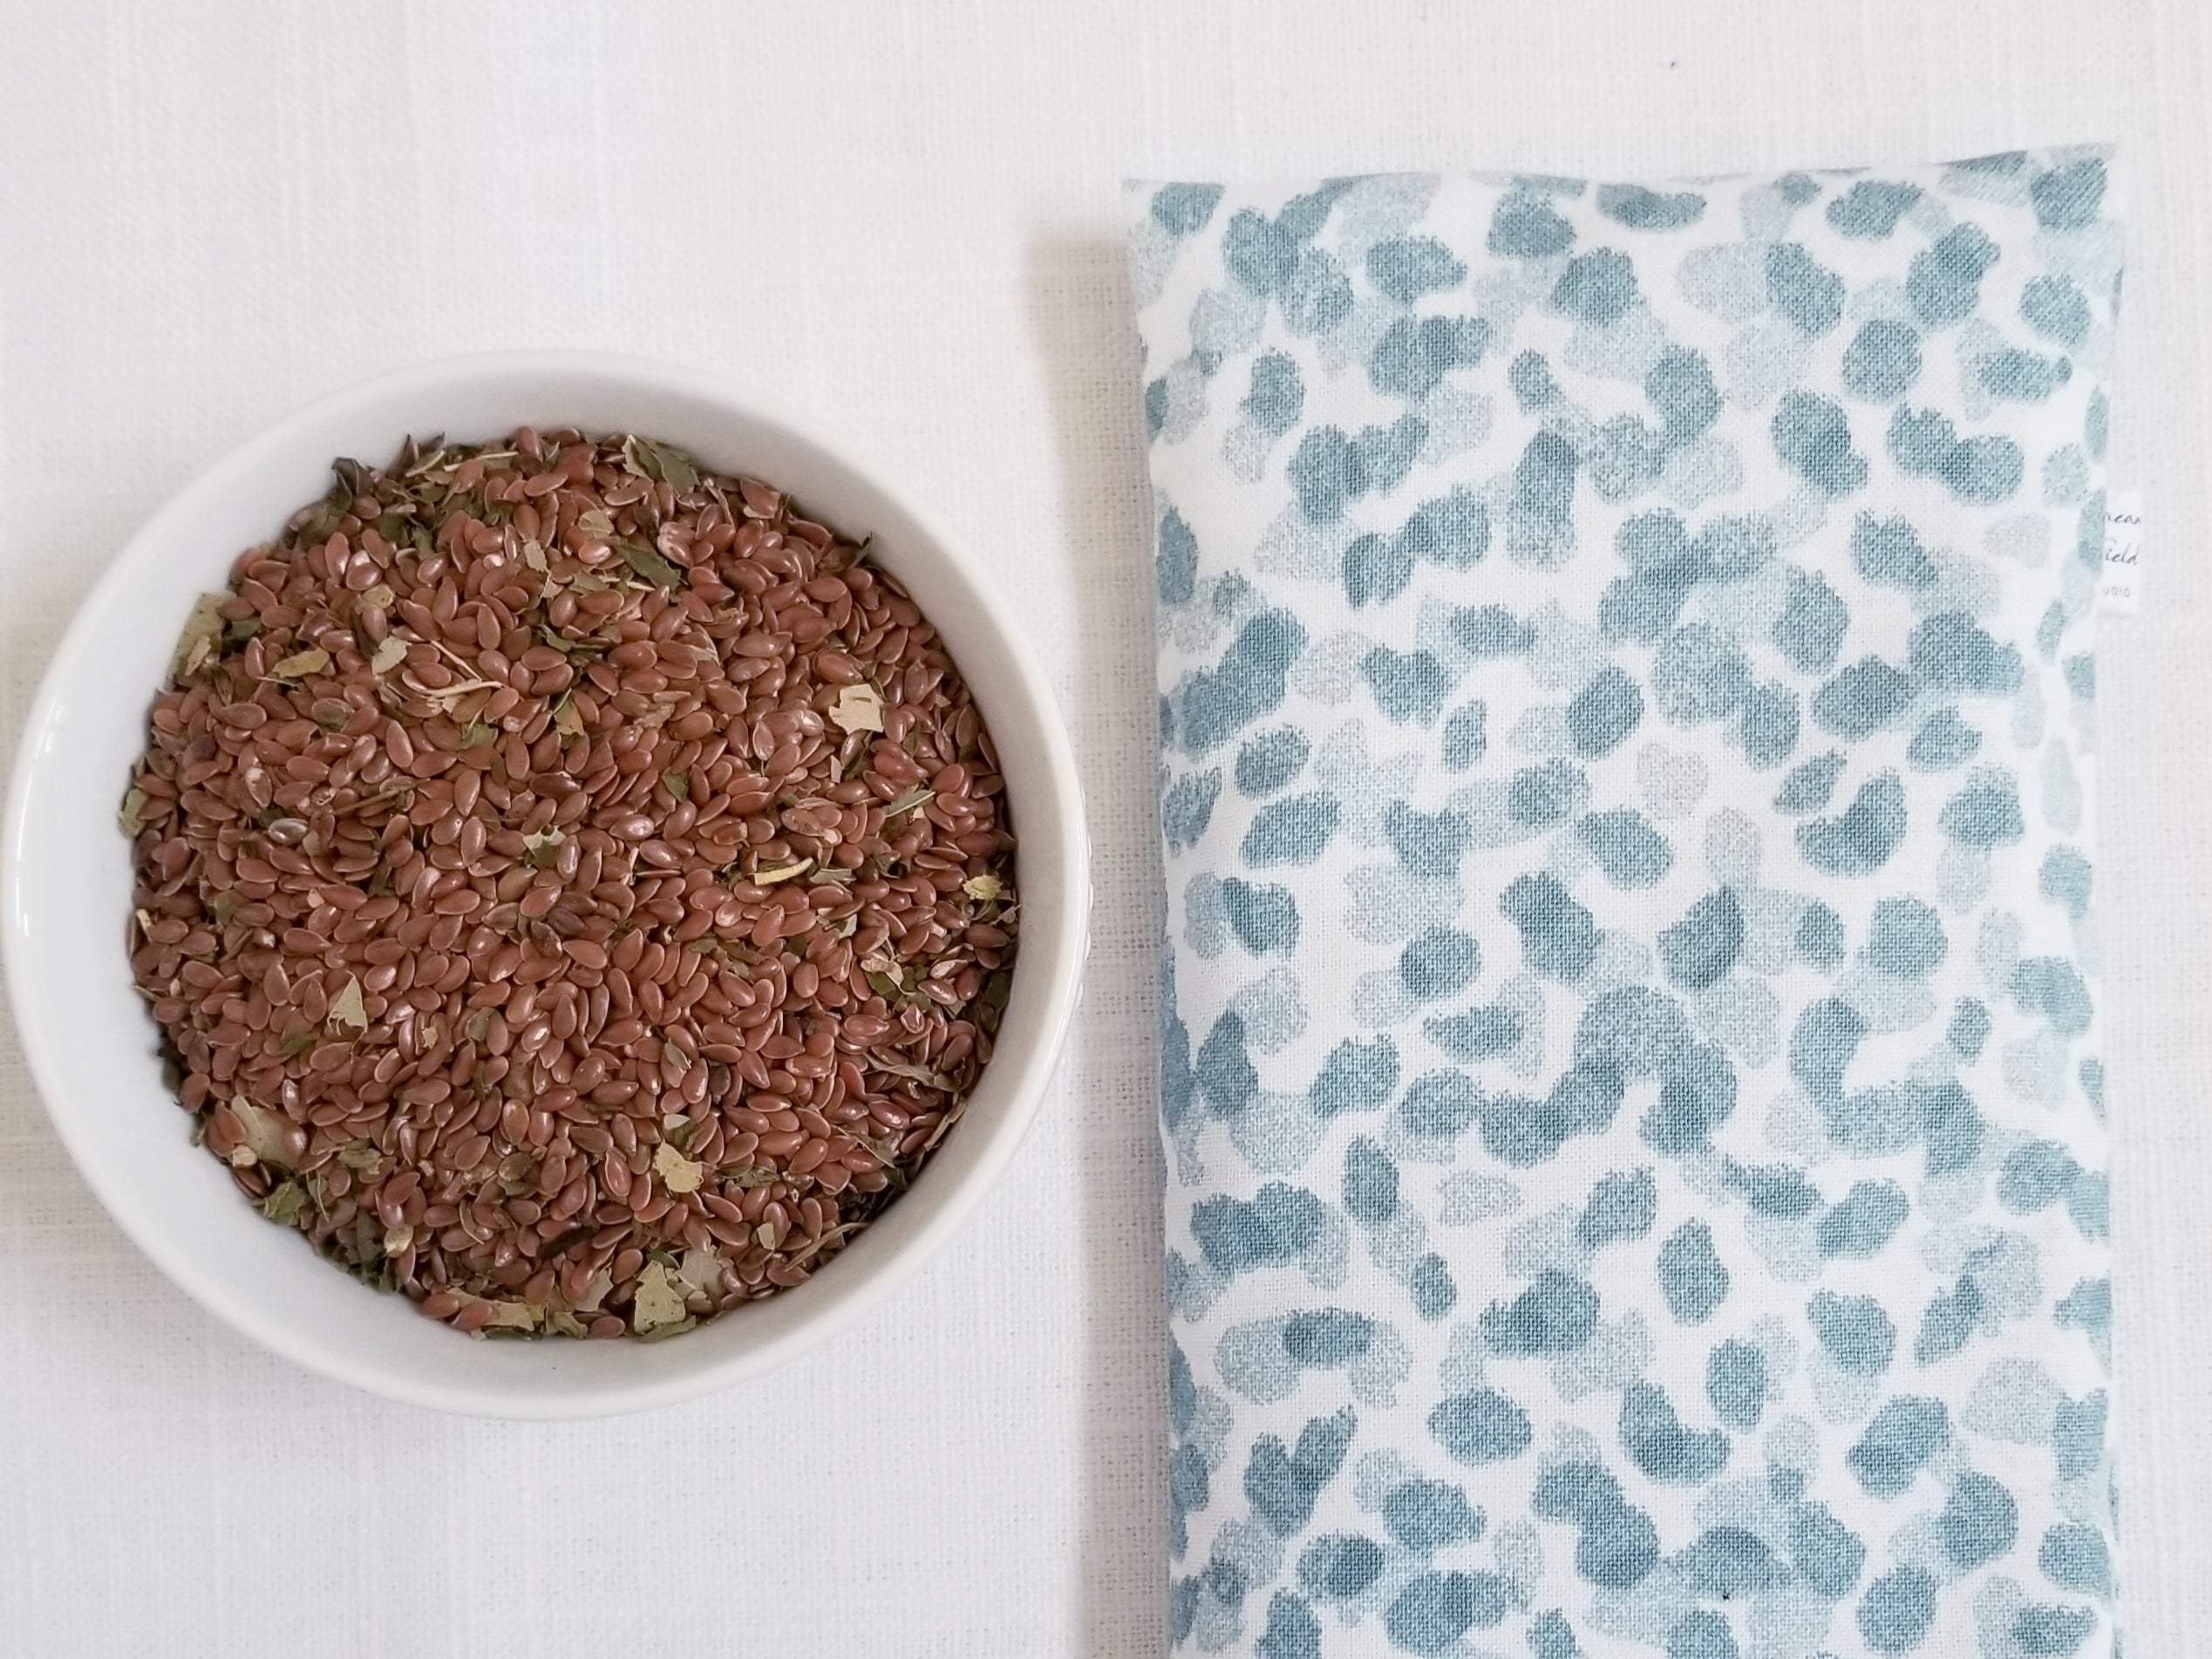 Closeup of blue spa dot print fabric and bowl of flax seeds and organic herb leaves